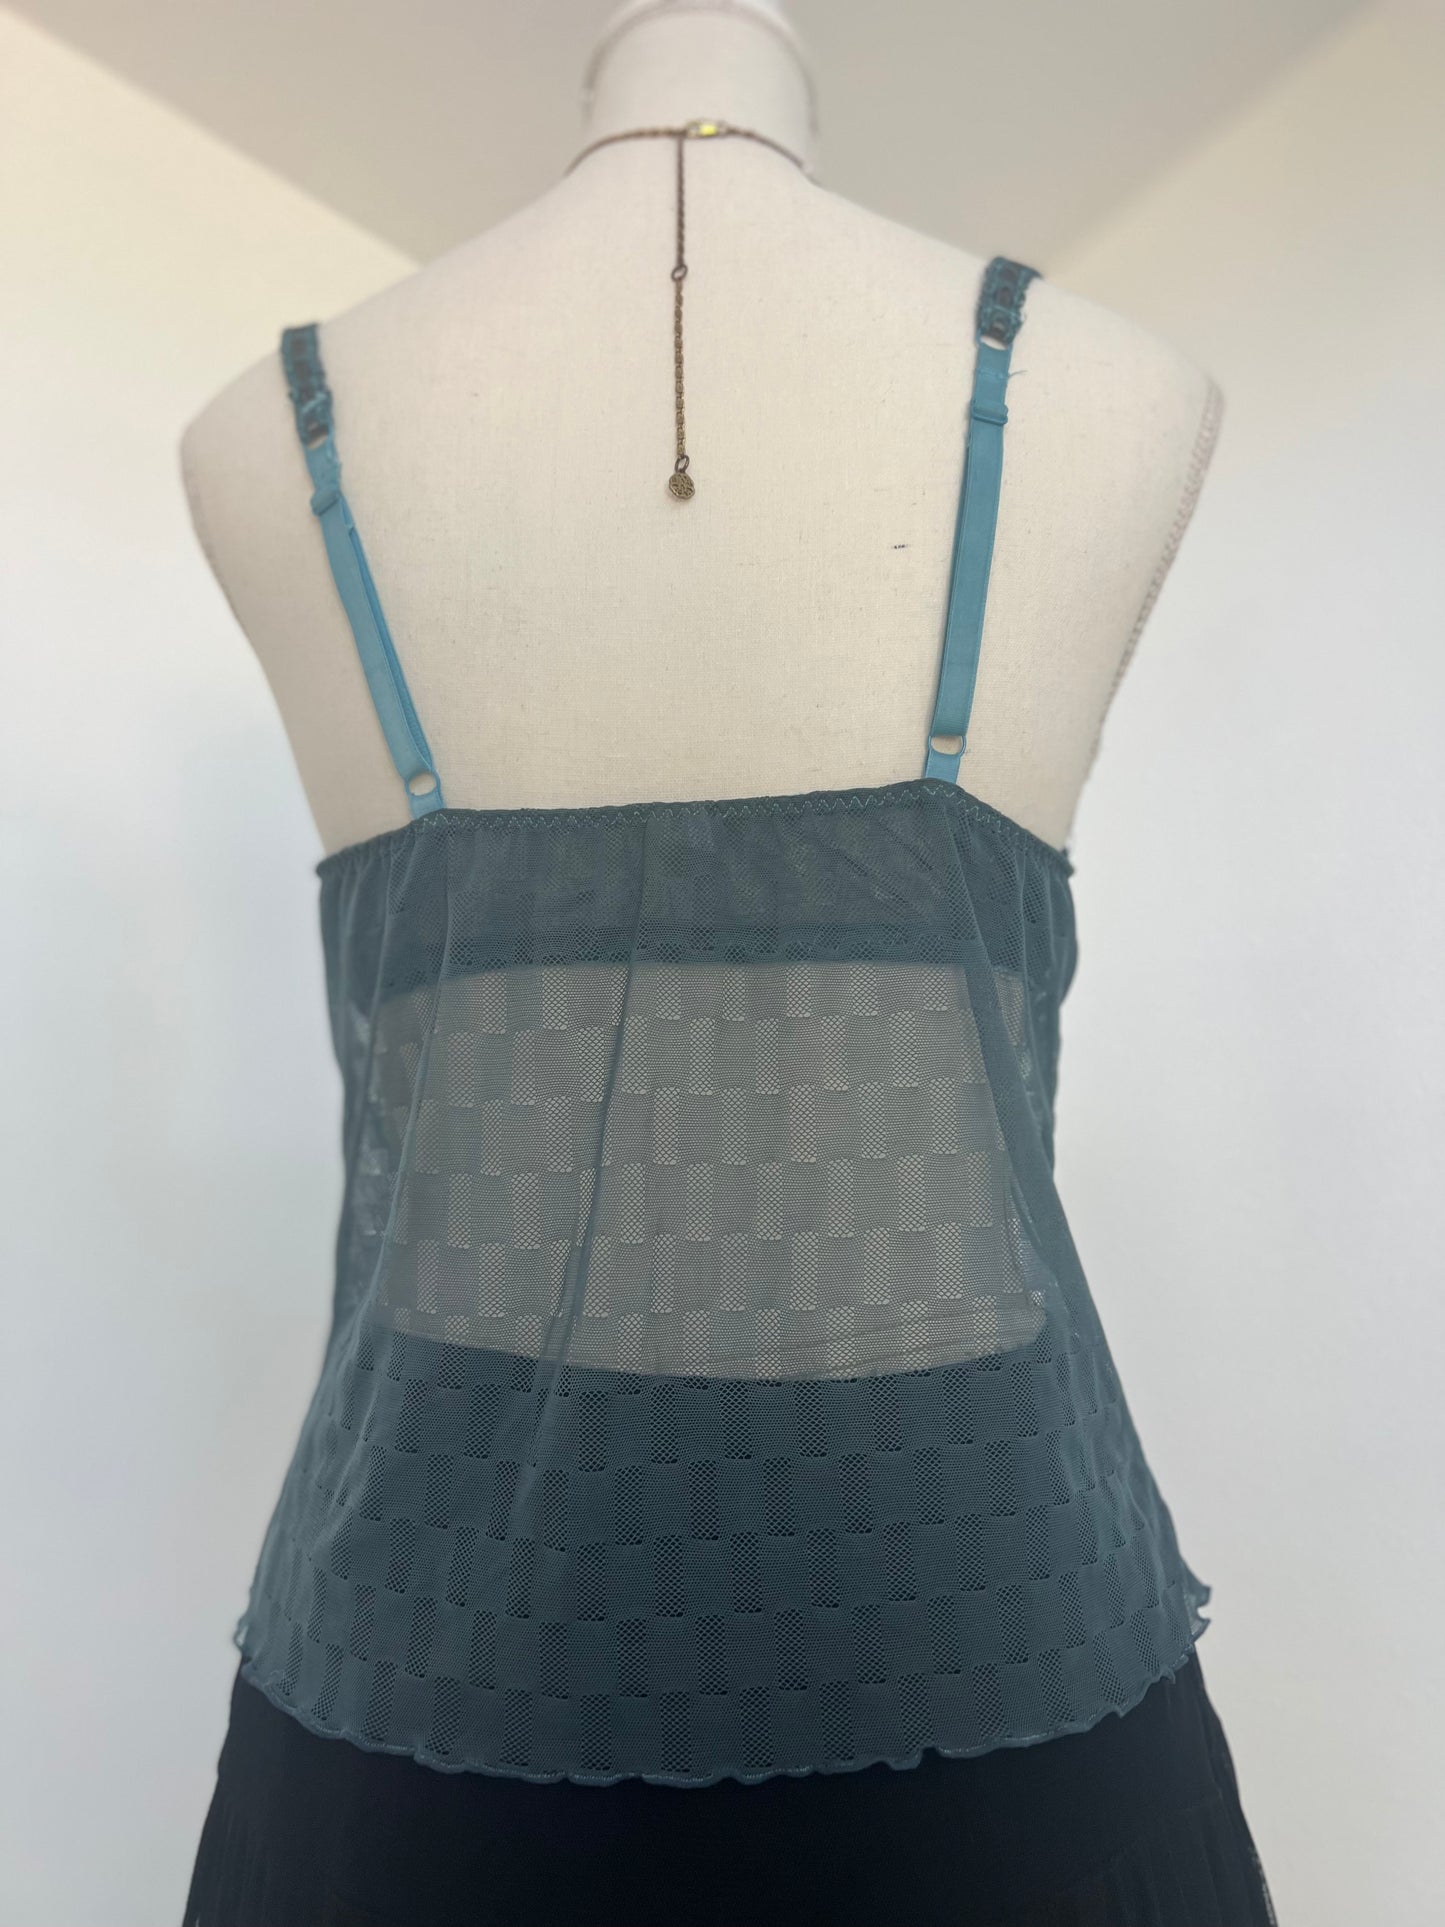 00's Checkered Bustier Mesh Top in Smoke Grey (M-L)